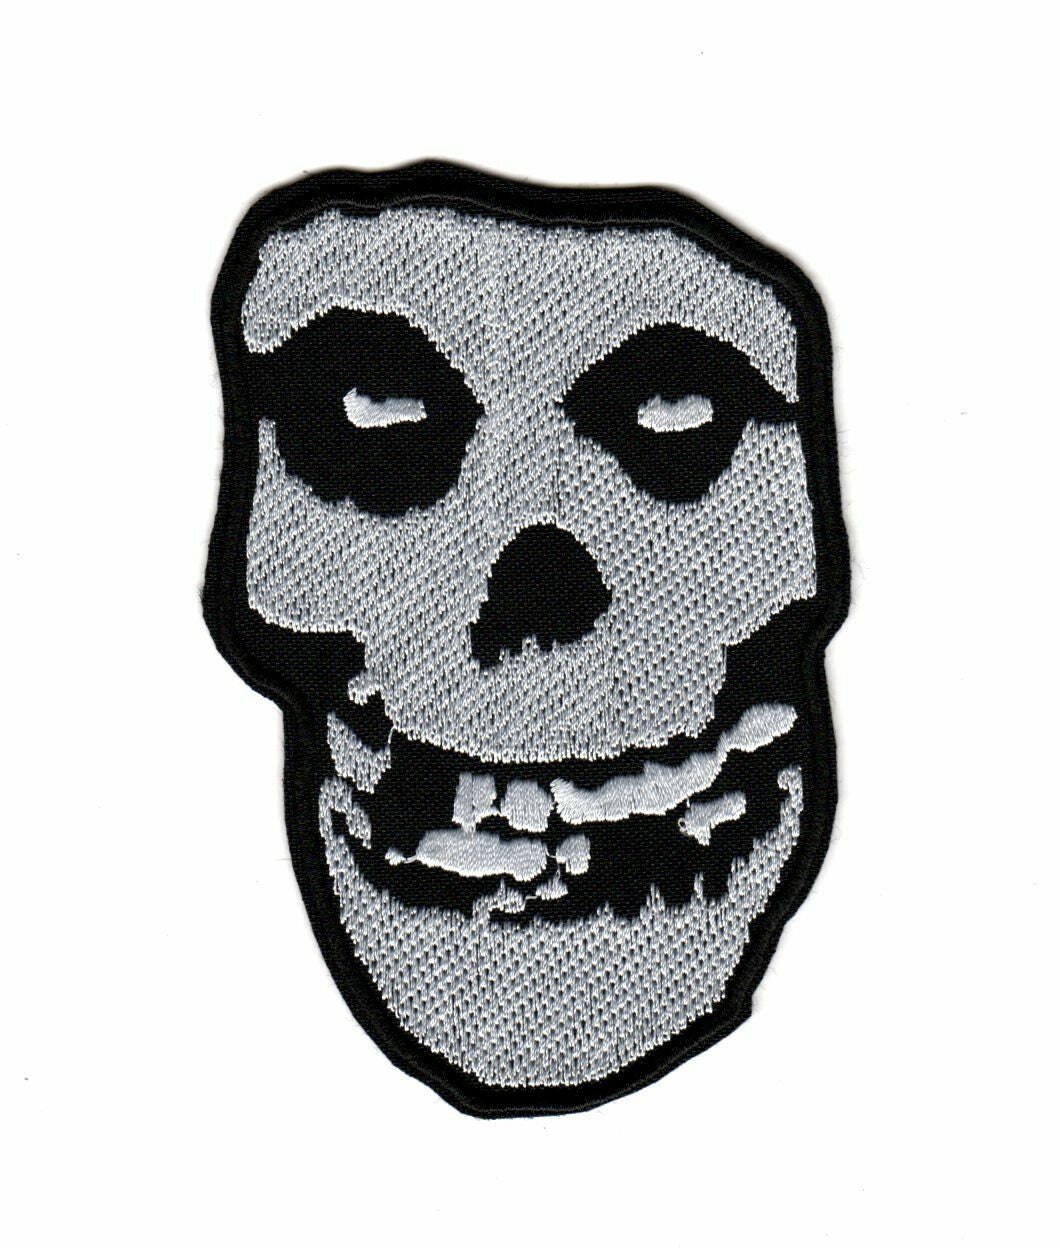 The Misfits Patch - Embroidered Crimson Ghost Skull - Punk Rock Band Logo  Patches - Horror Punk Music - Iron On Embroidery - Size: 10.8 x 15.6 inches